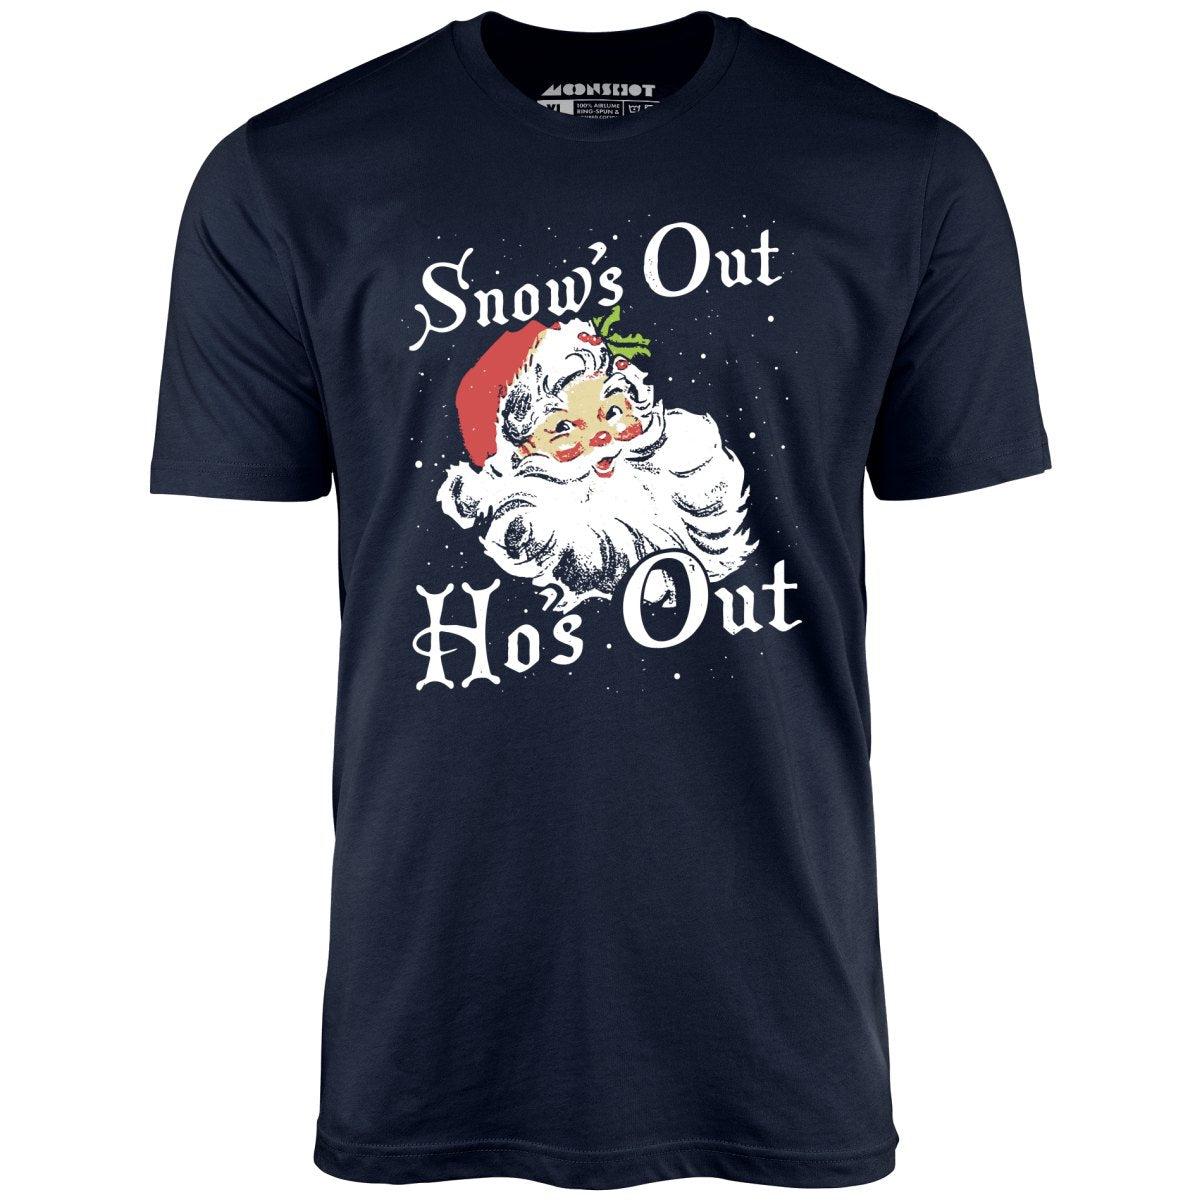 Snow's Out Ho's Out - Unisex T-Shirt